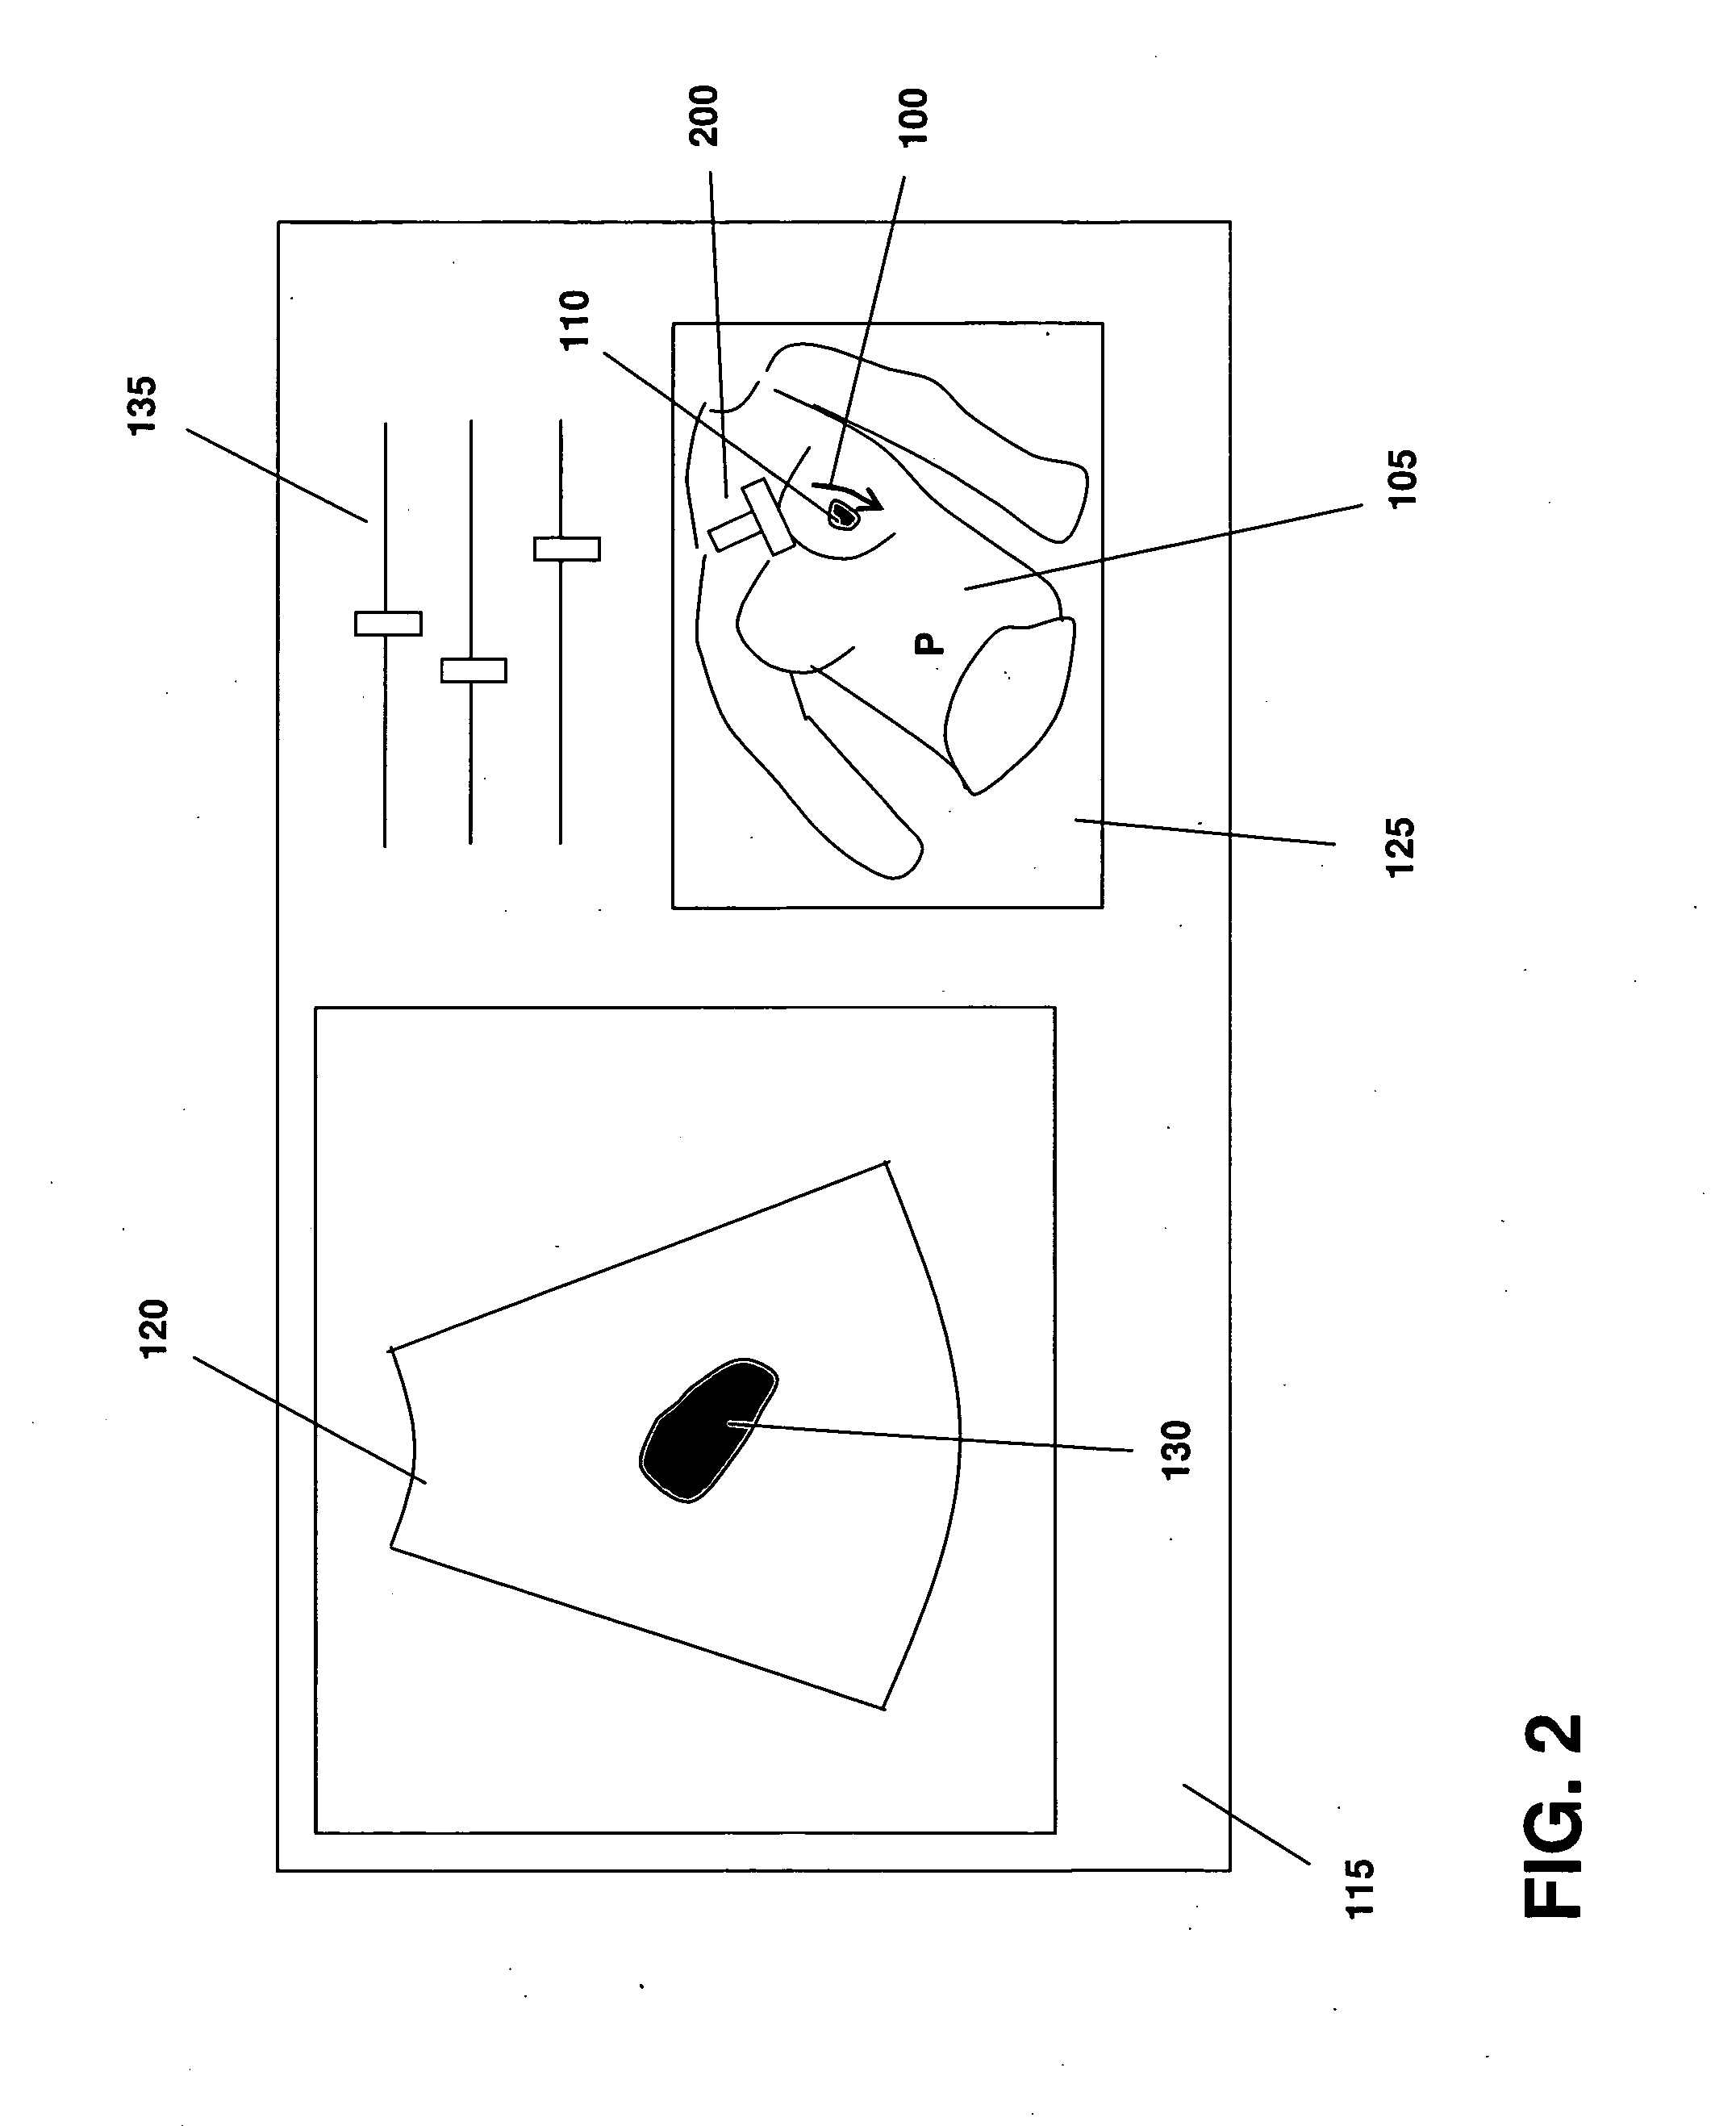 Methods and systems for guiding the acquisition of ultrasound images